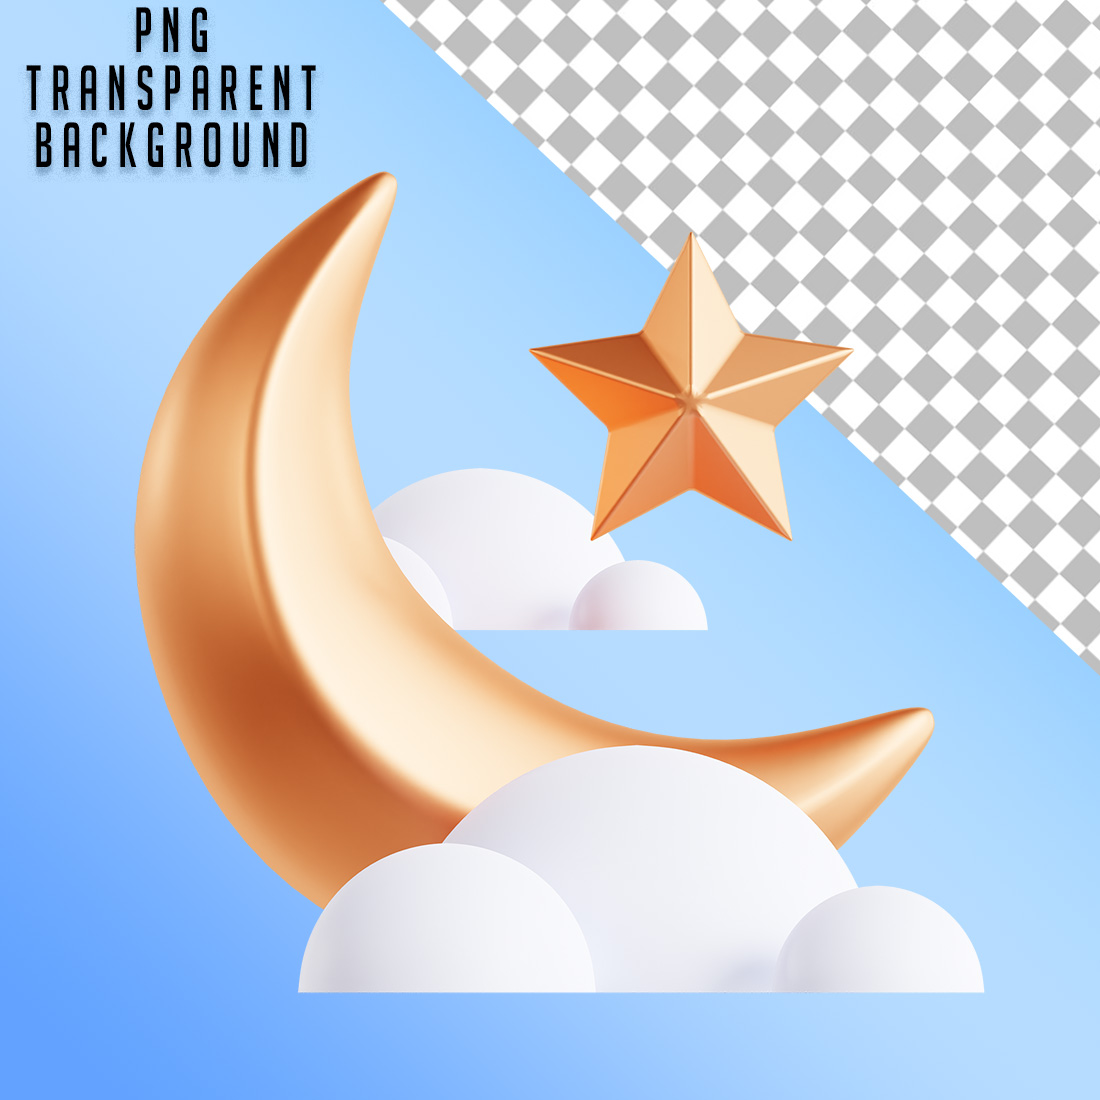 Lowpoly 3d icons Islamic with Transparent Background preview image.